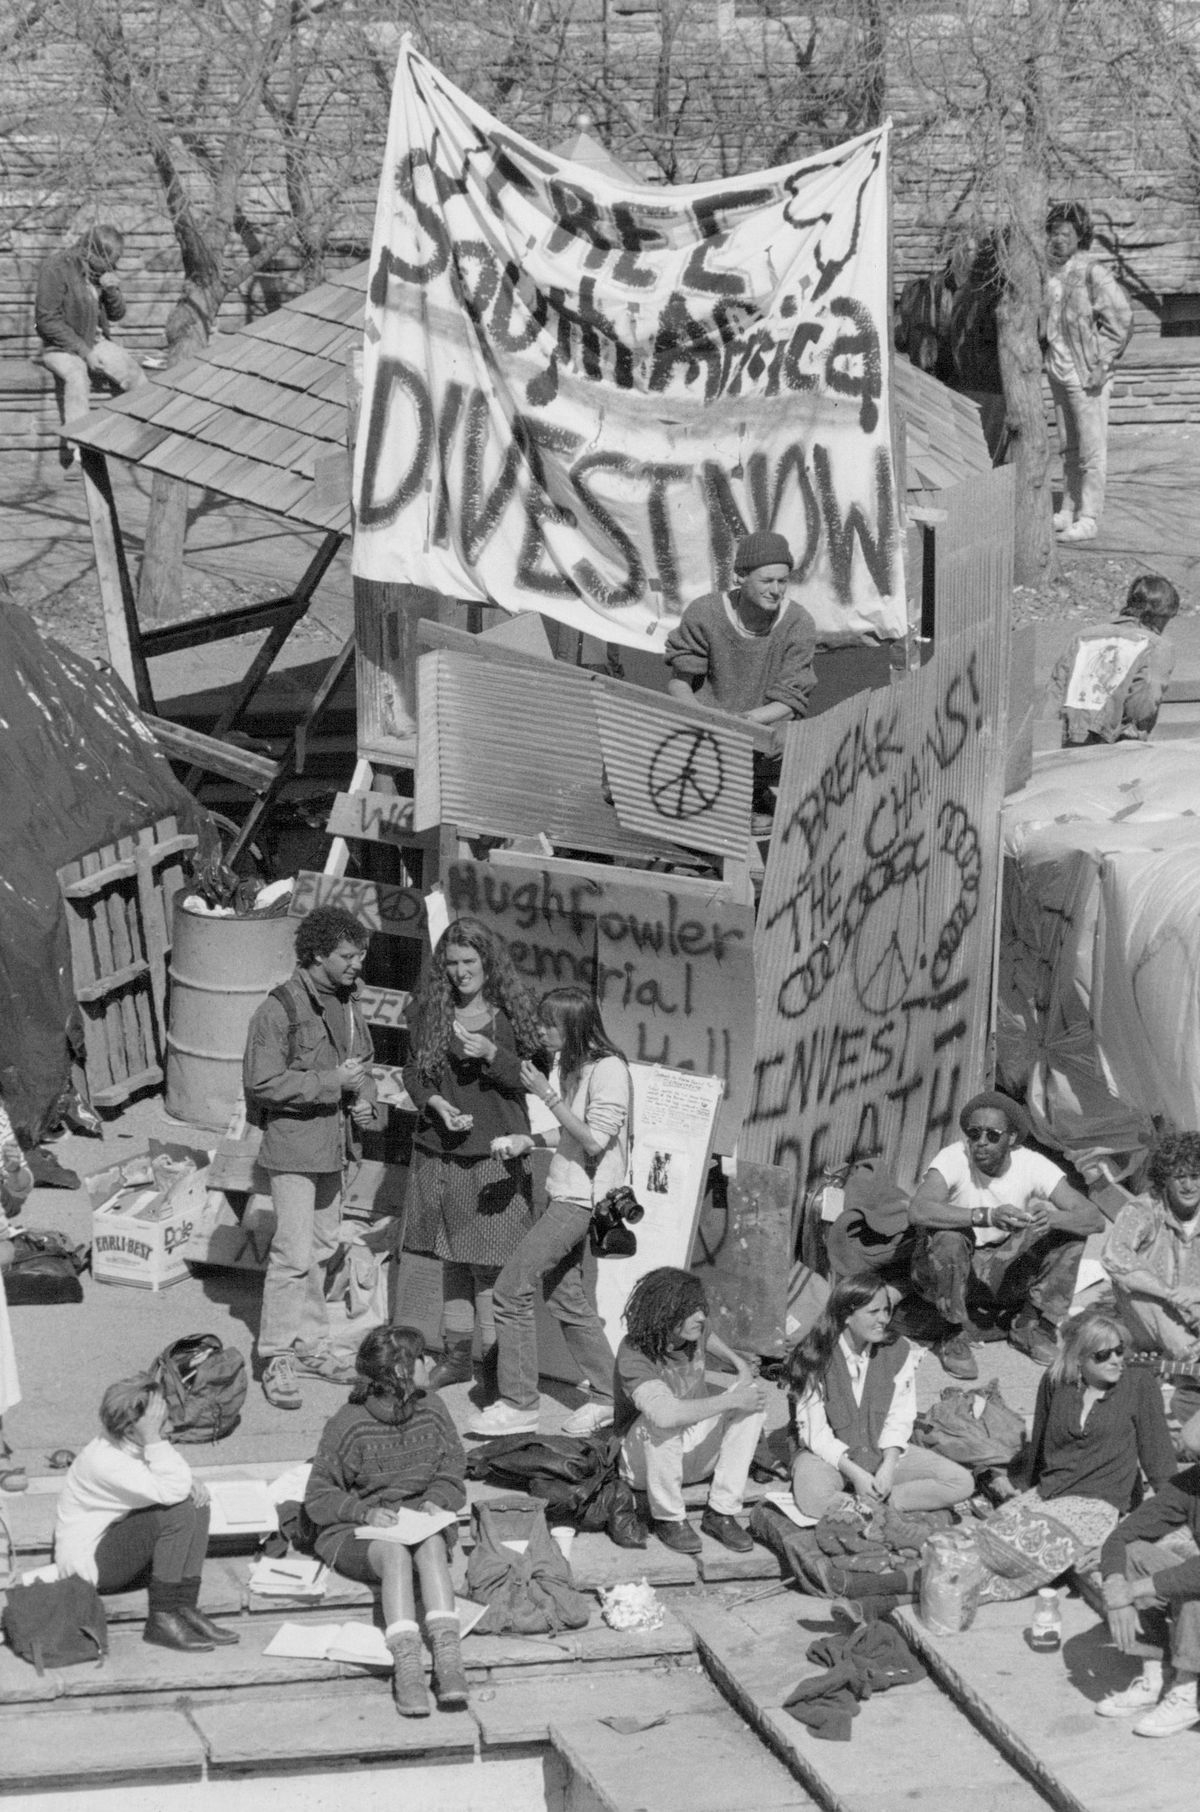 Anti-apartheid campaigners call for divestment from South Africa at protest at the University of Colorado Boulder on April 24, 1988.